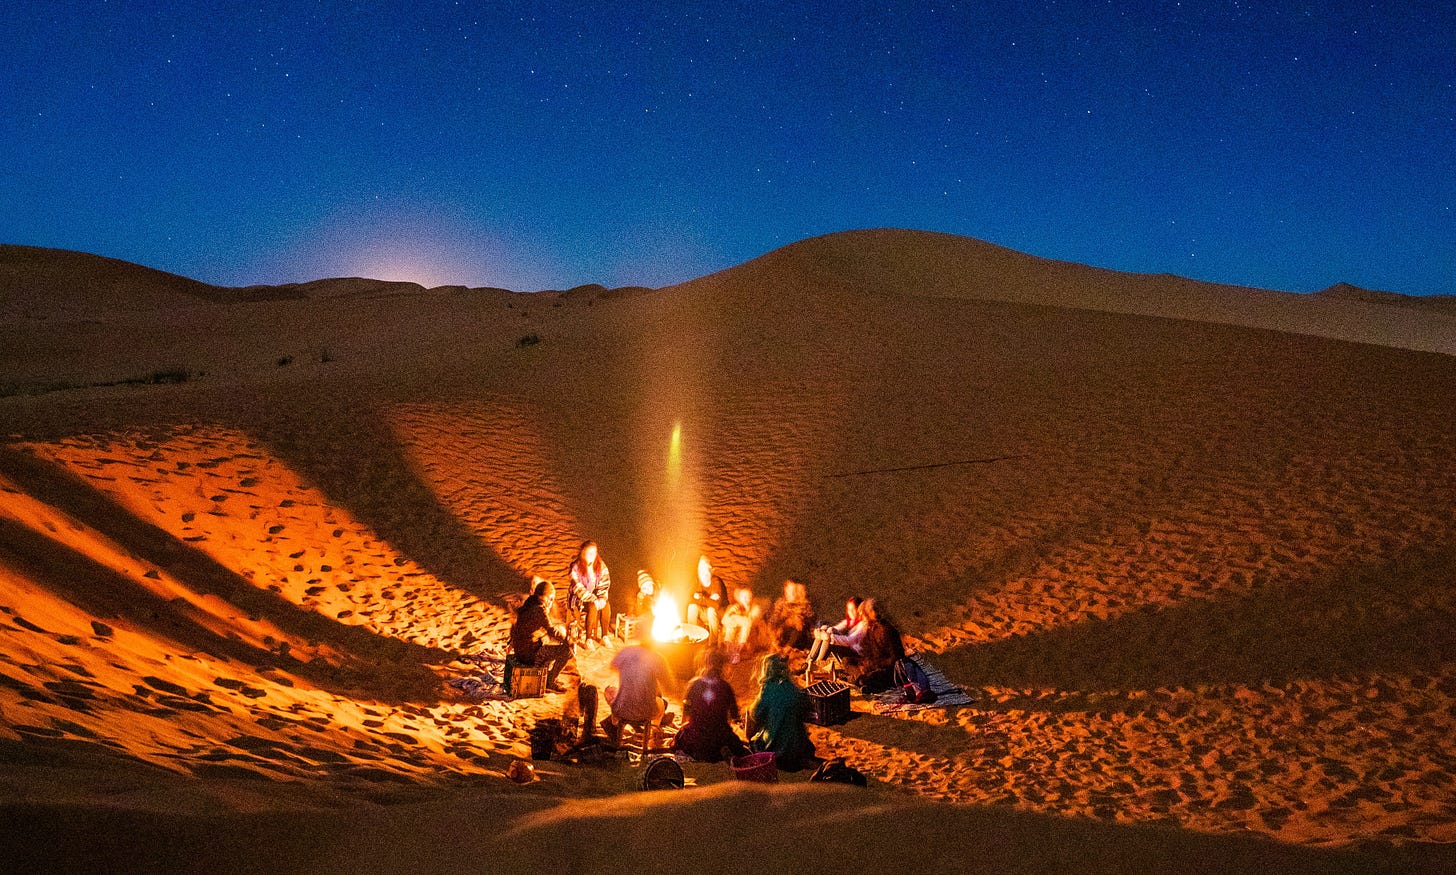 People sitting around a bonfire in the desert at night.